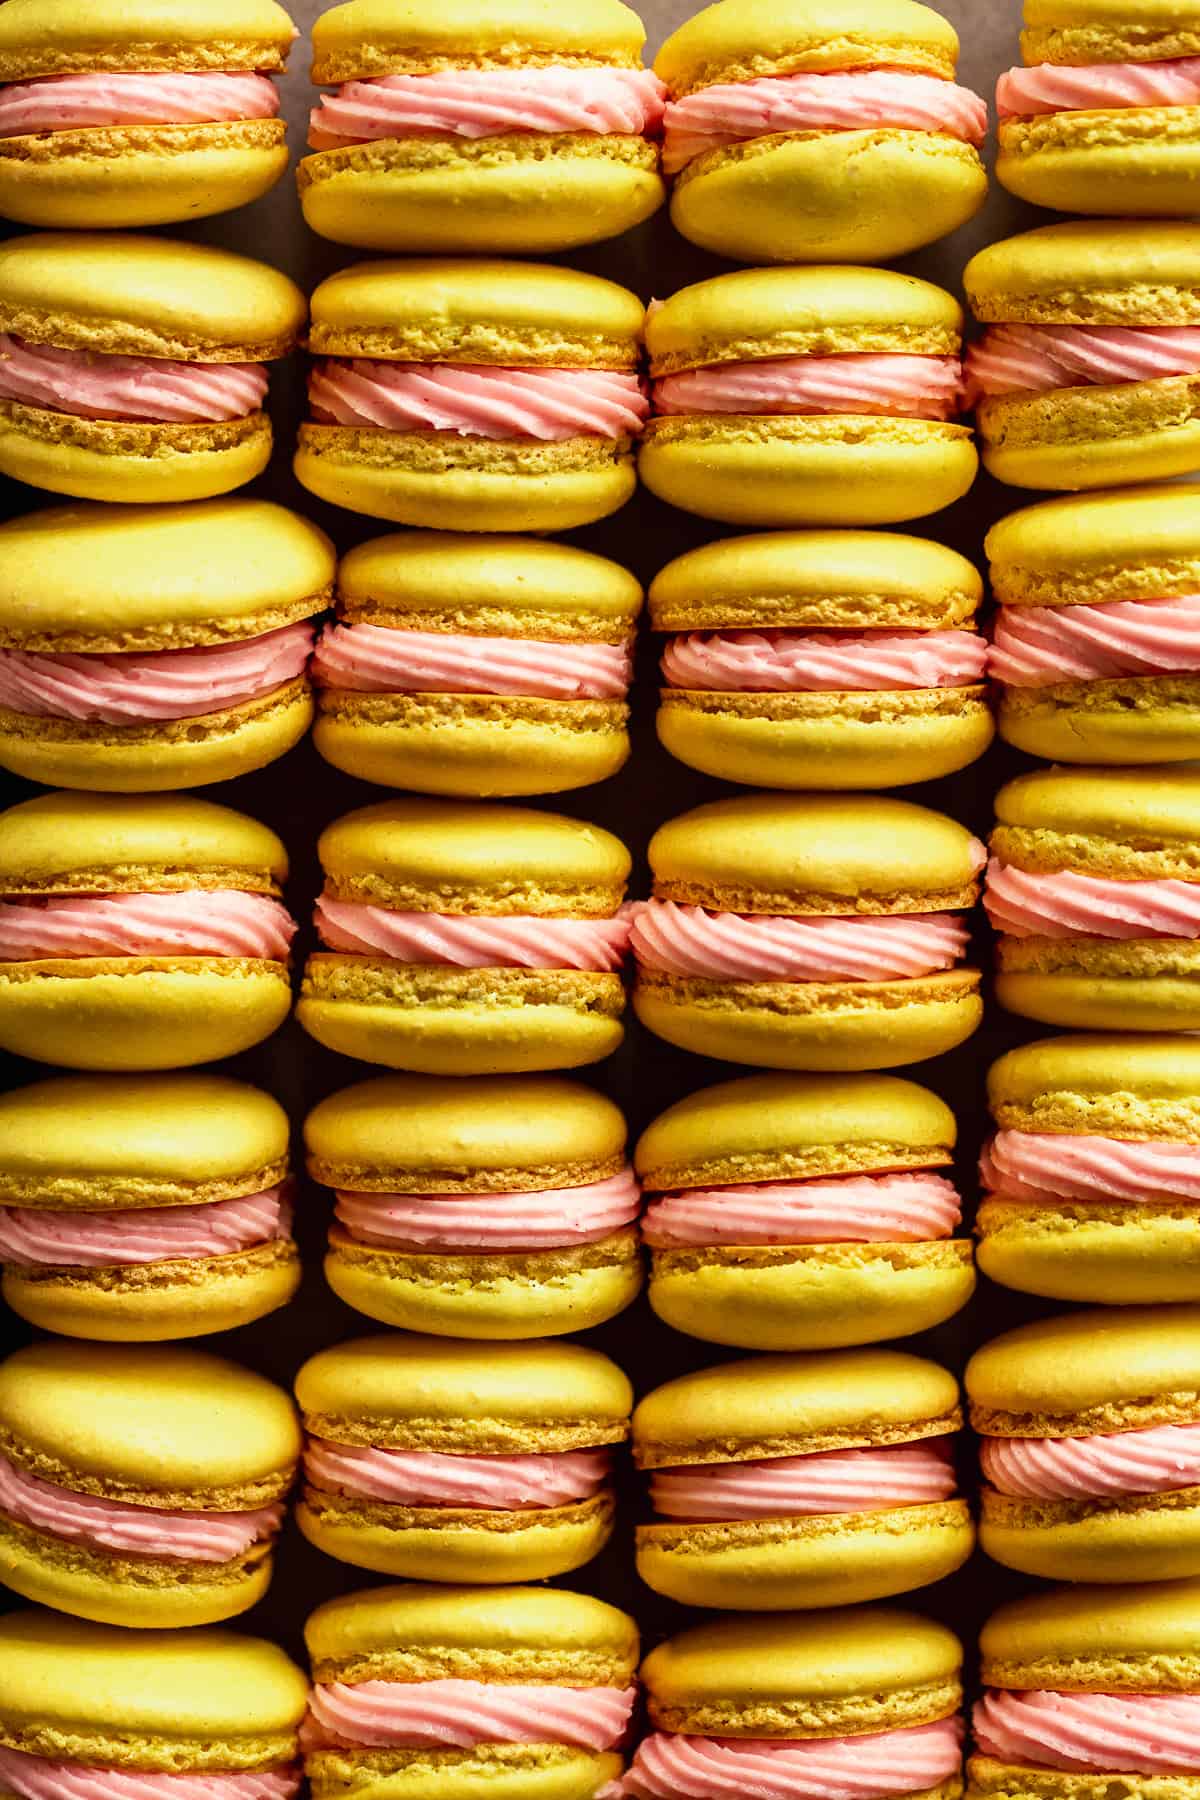 Lemonade macarons with pink icing lined up in rows.